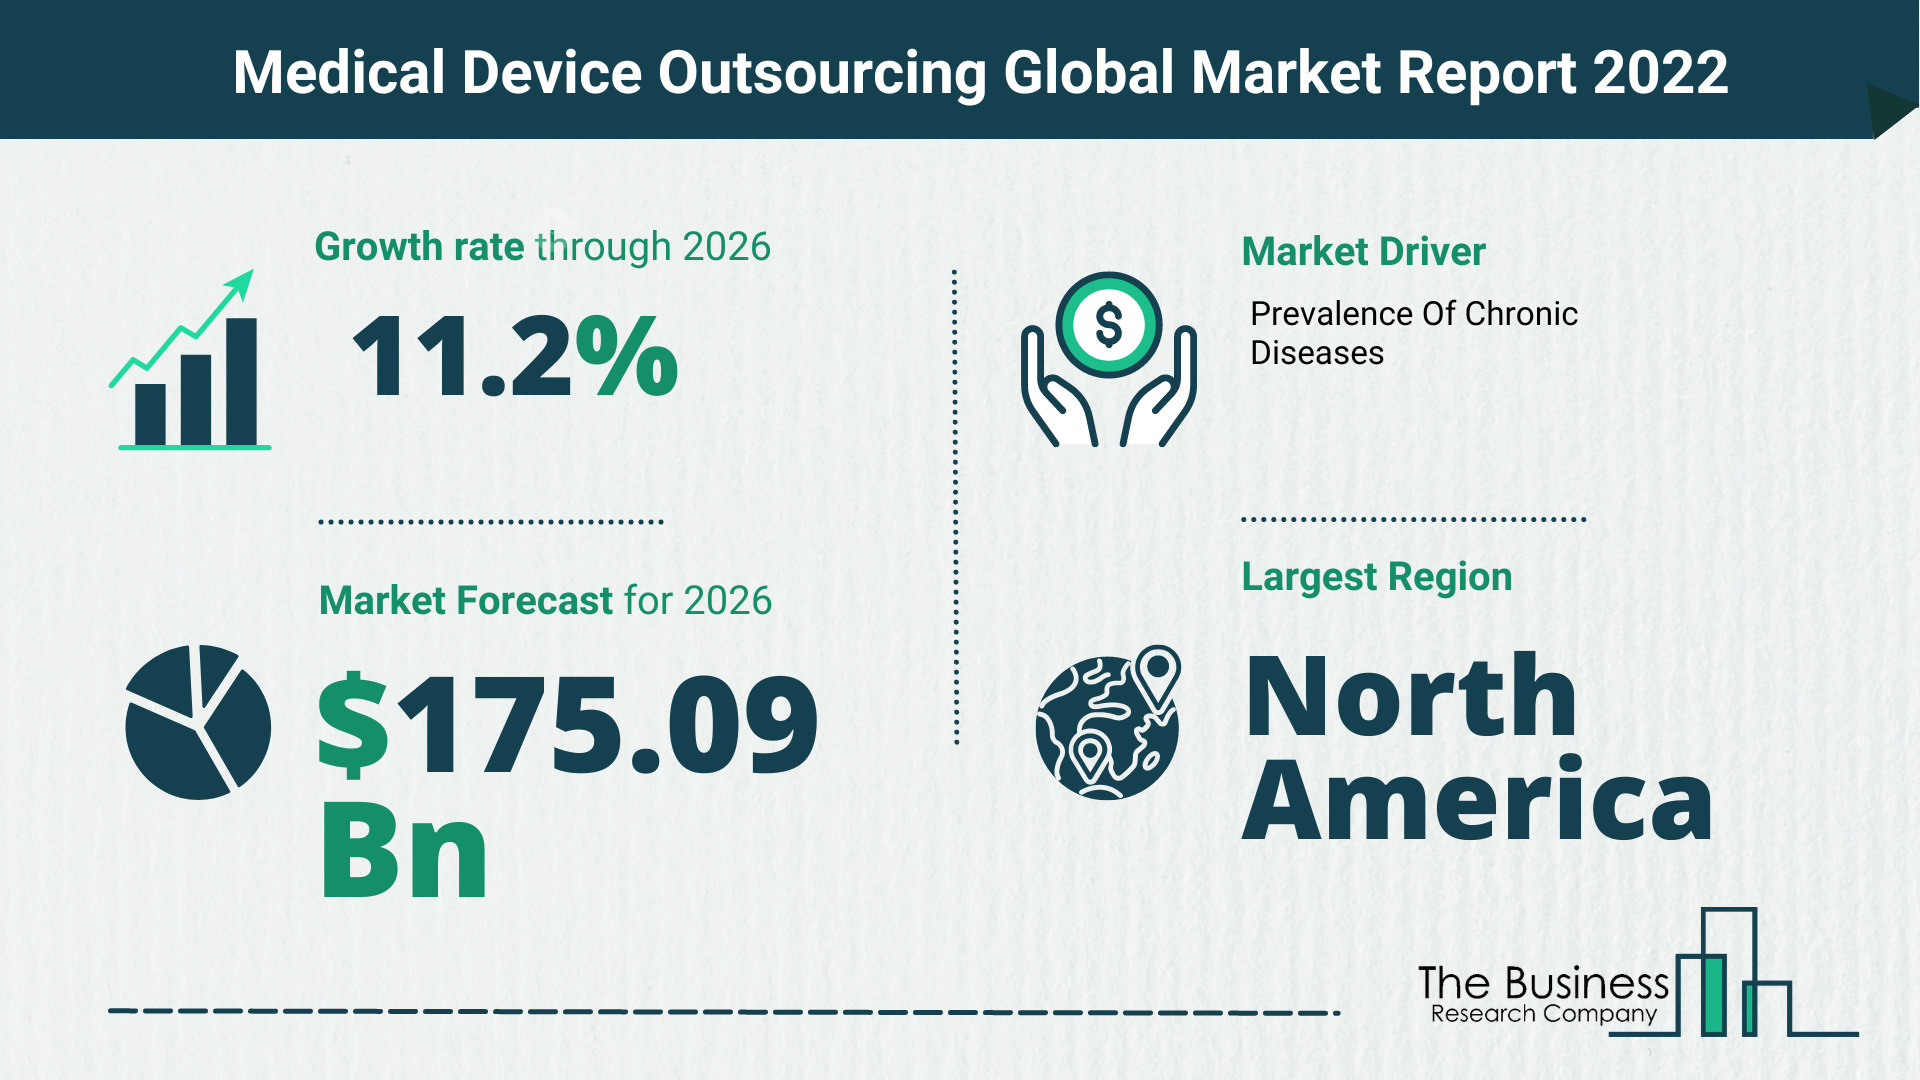 Global Medical Device Outsourcing Market 2022 – Market Opportunities And Strategies